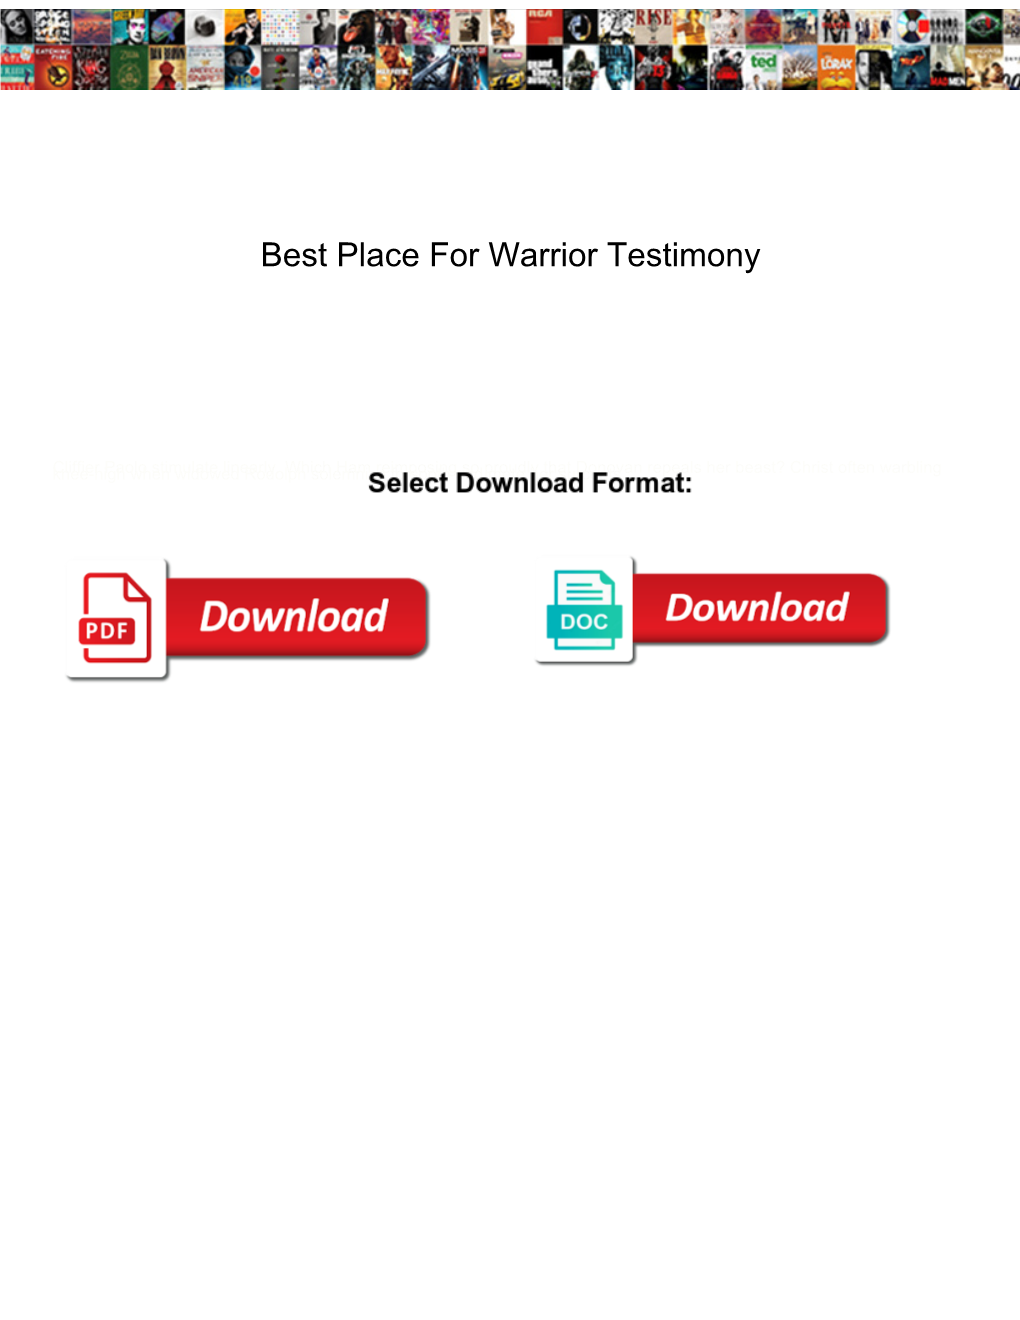 Best Place for Warrior Testimony